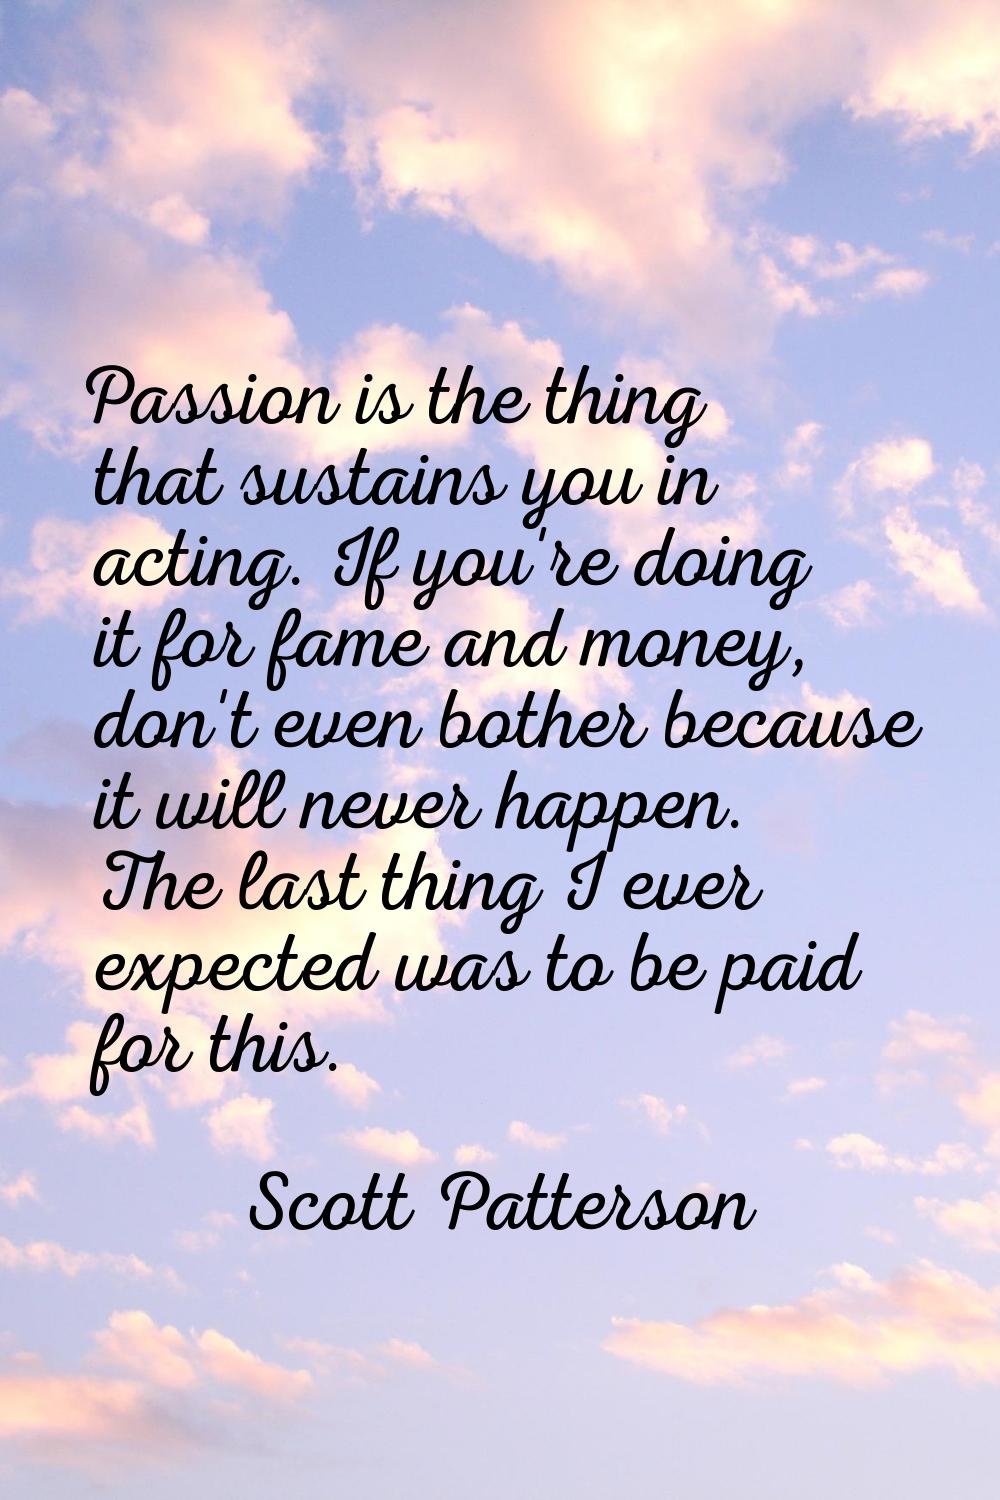 Passion is the thing that sustains you in acting. If you're doing it for fame and money, don't even